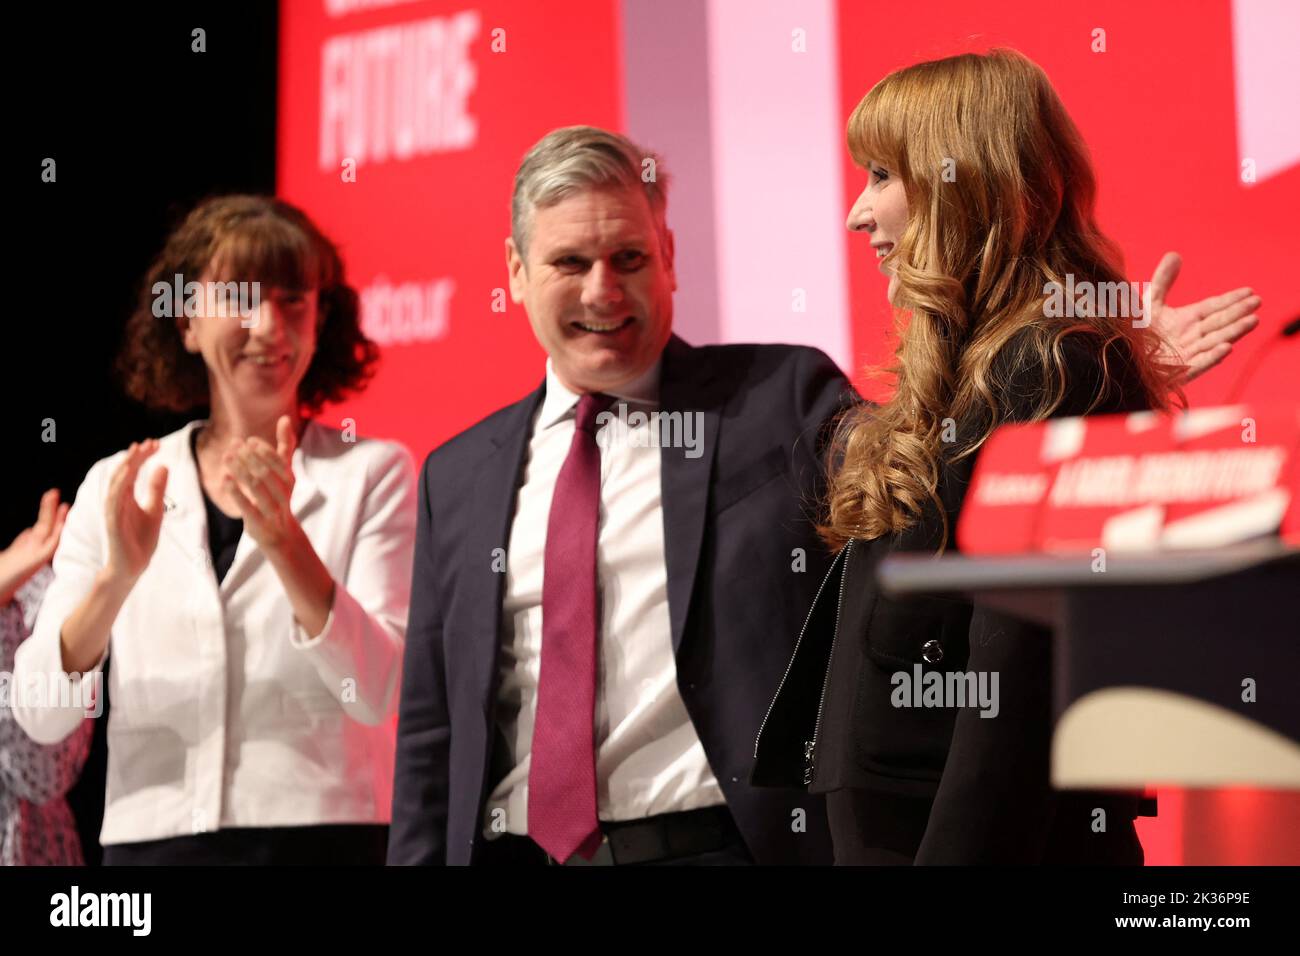 Britain's Labour Party leader Keir Starmer, Labour Party Chair Anneliese Dodds applaud after deputy leader Angela Rayner's speech at Britain's Labour Party's annual conference in Liverpool, Britain, September 25, 2022. REUTERS/Phil Noble Stock Photo